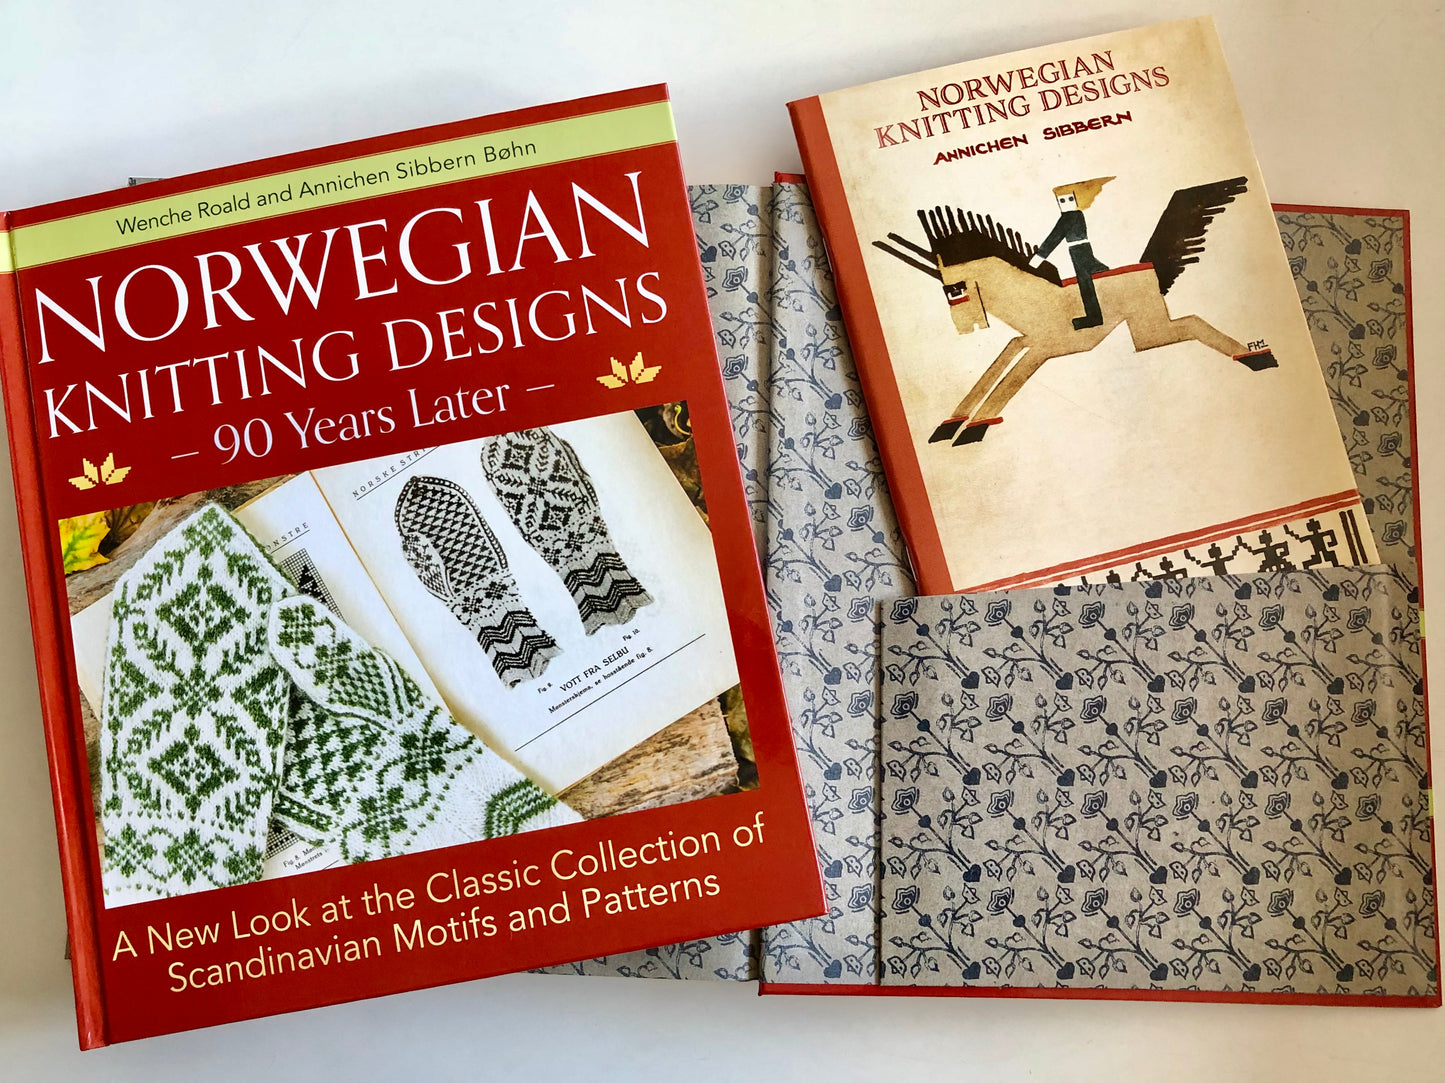 Norwegian Knitting Designs - 90 Years Later | Autographed Copy